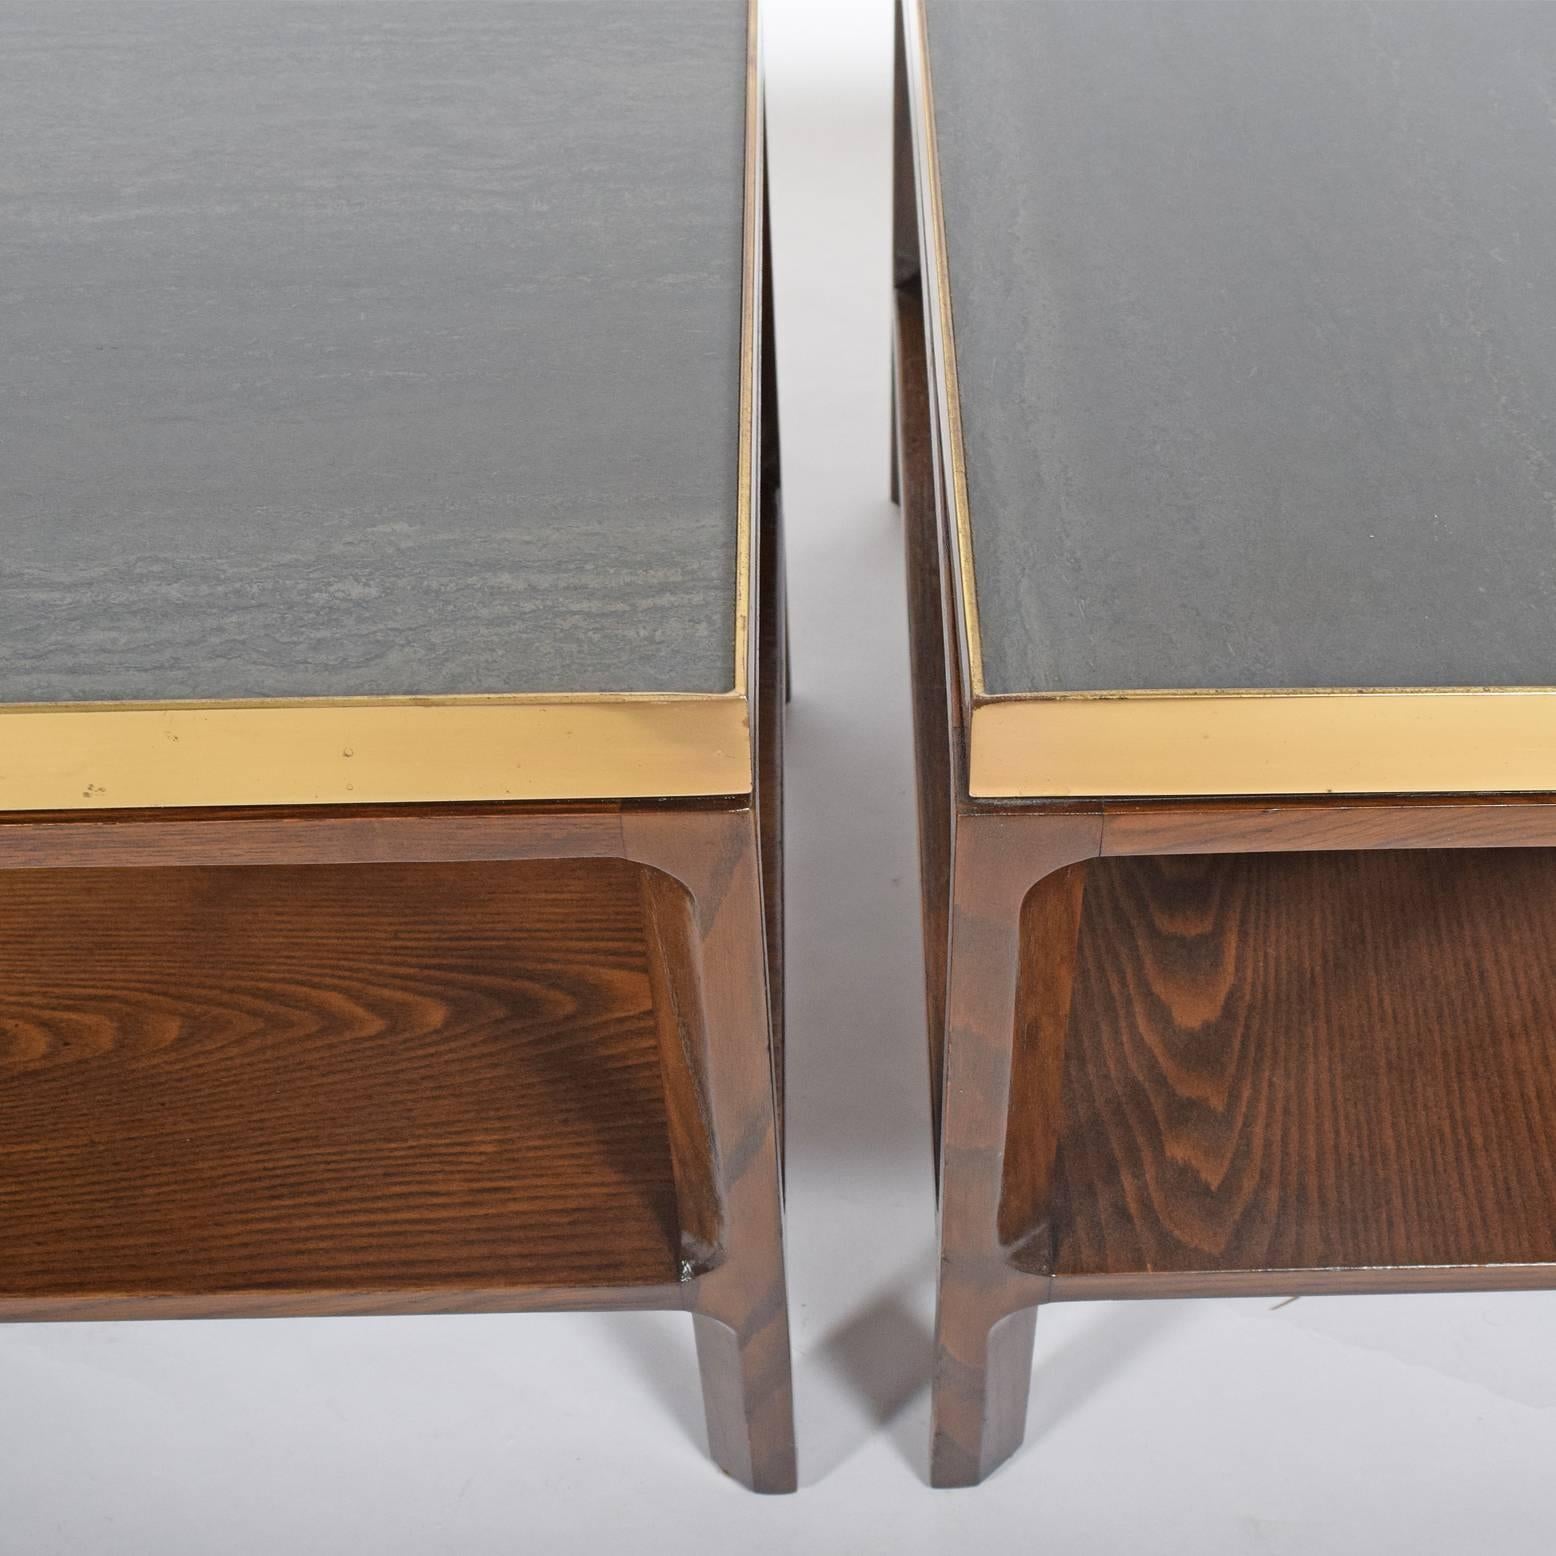 American Pair of Side Tables by Edward Wormley for Dunbar